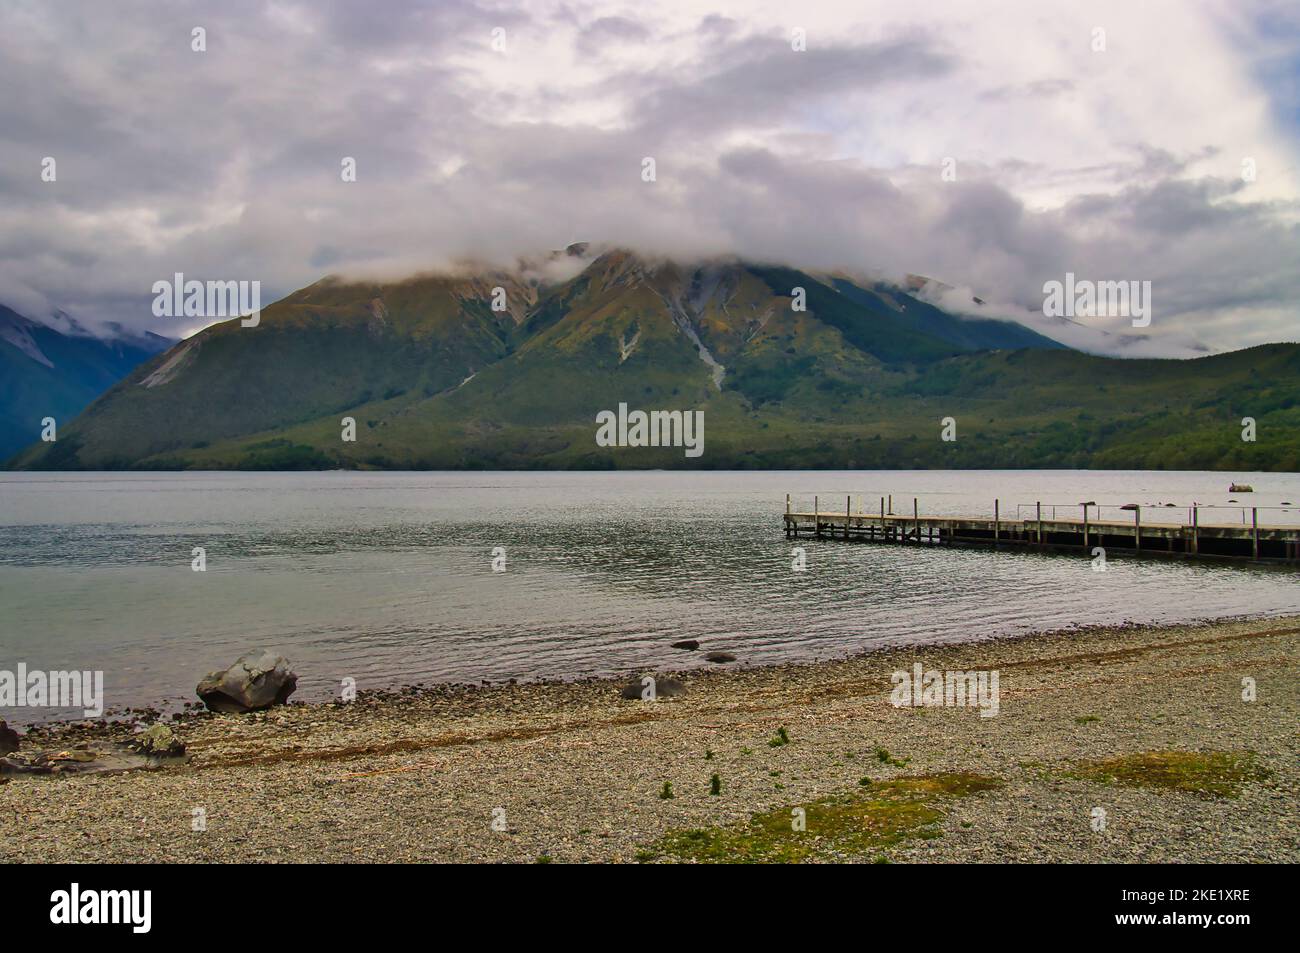 The jetty of the water taxi on Lake Rotoroa, Nelson Lakes National Park, Tasman region, South Island, New Zealand, on a cloudy day Stock Photo